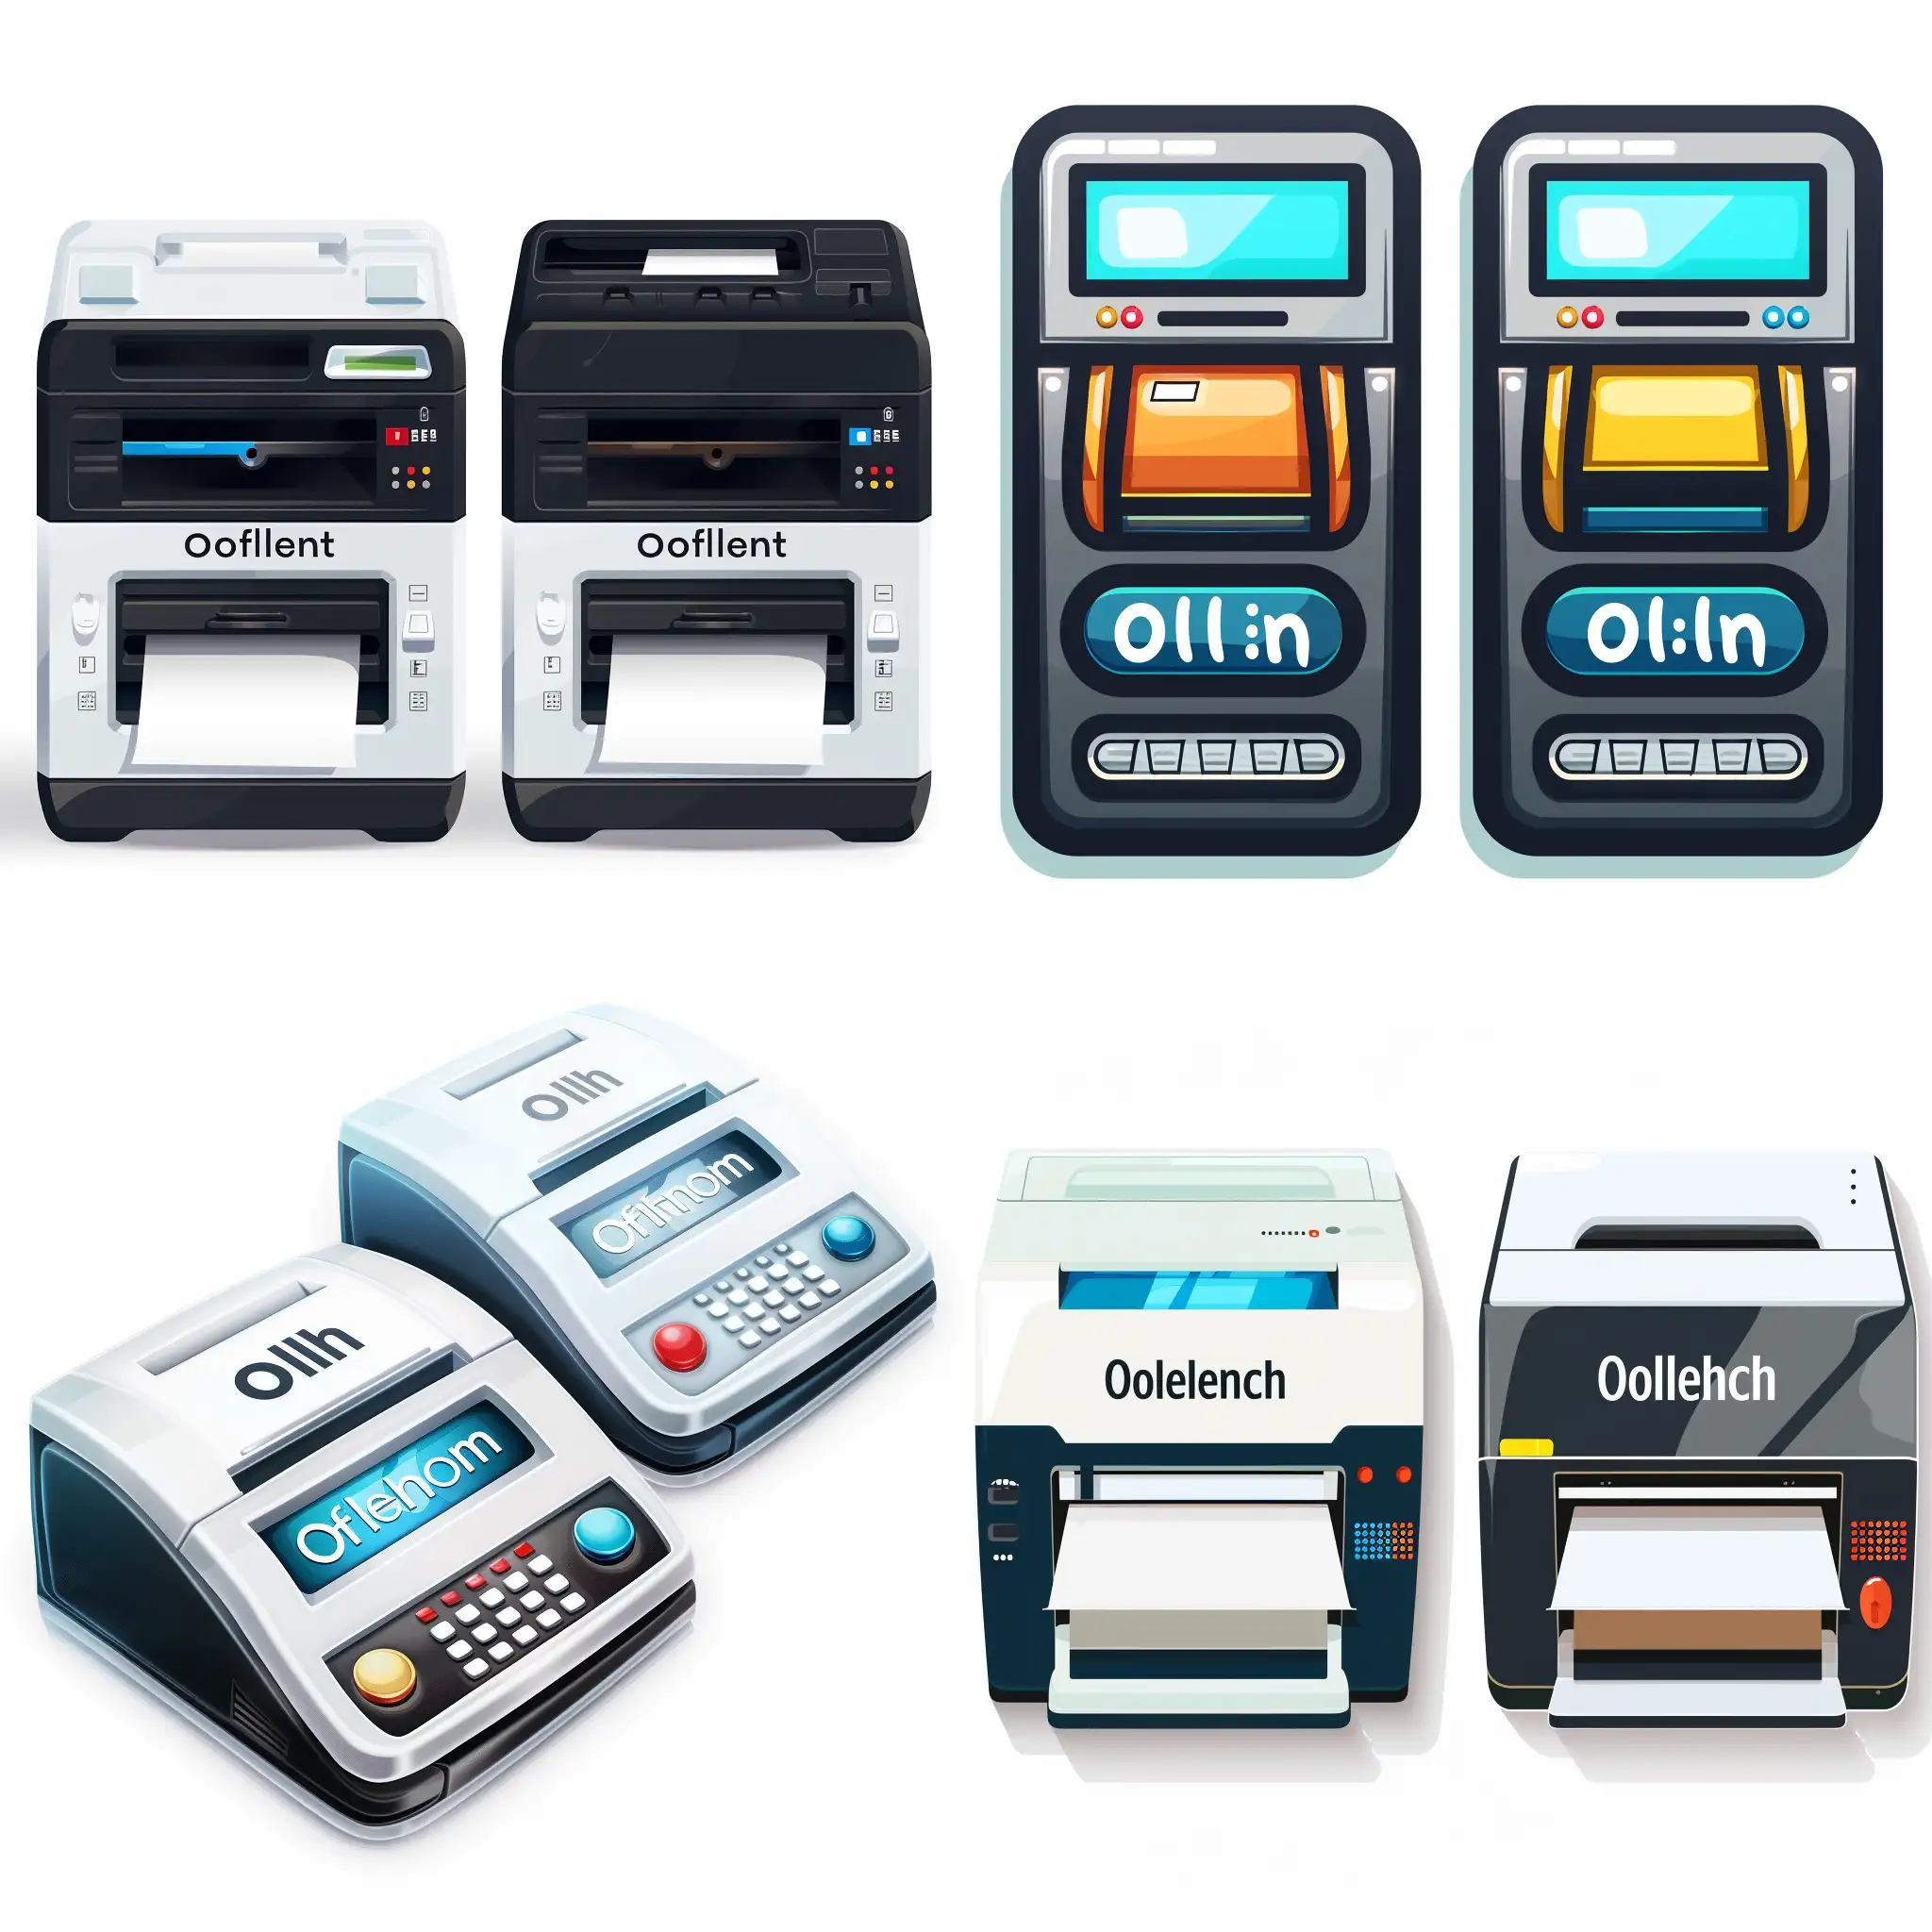 Online-and-Offline-Network-Printers-Icon-Set-for-Application-Tray